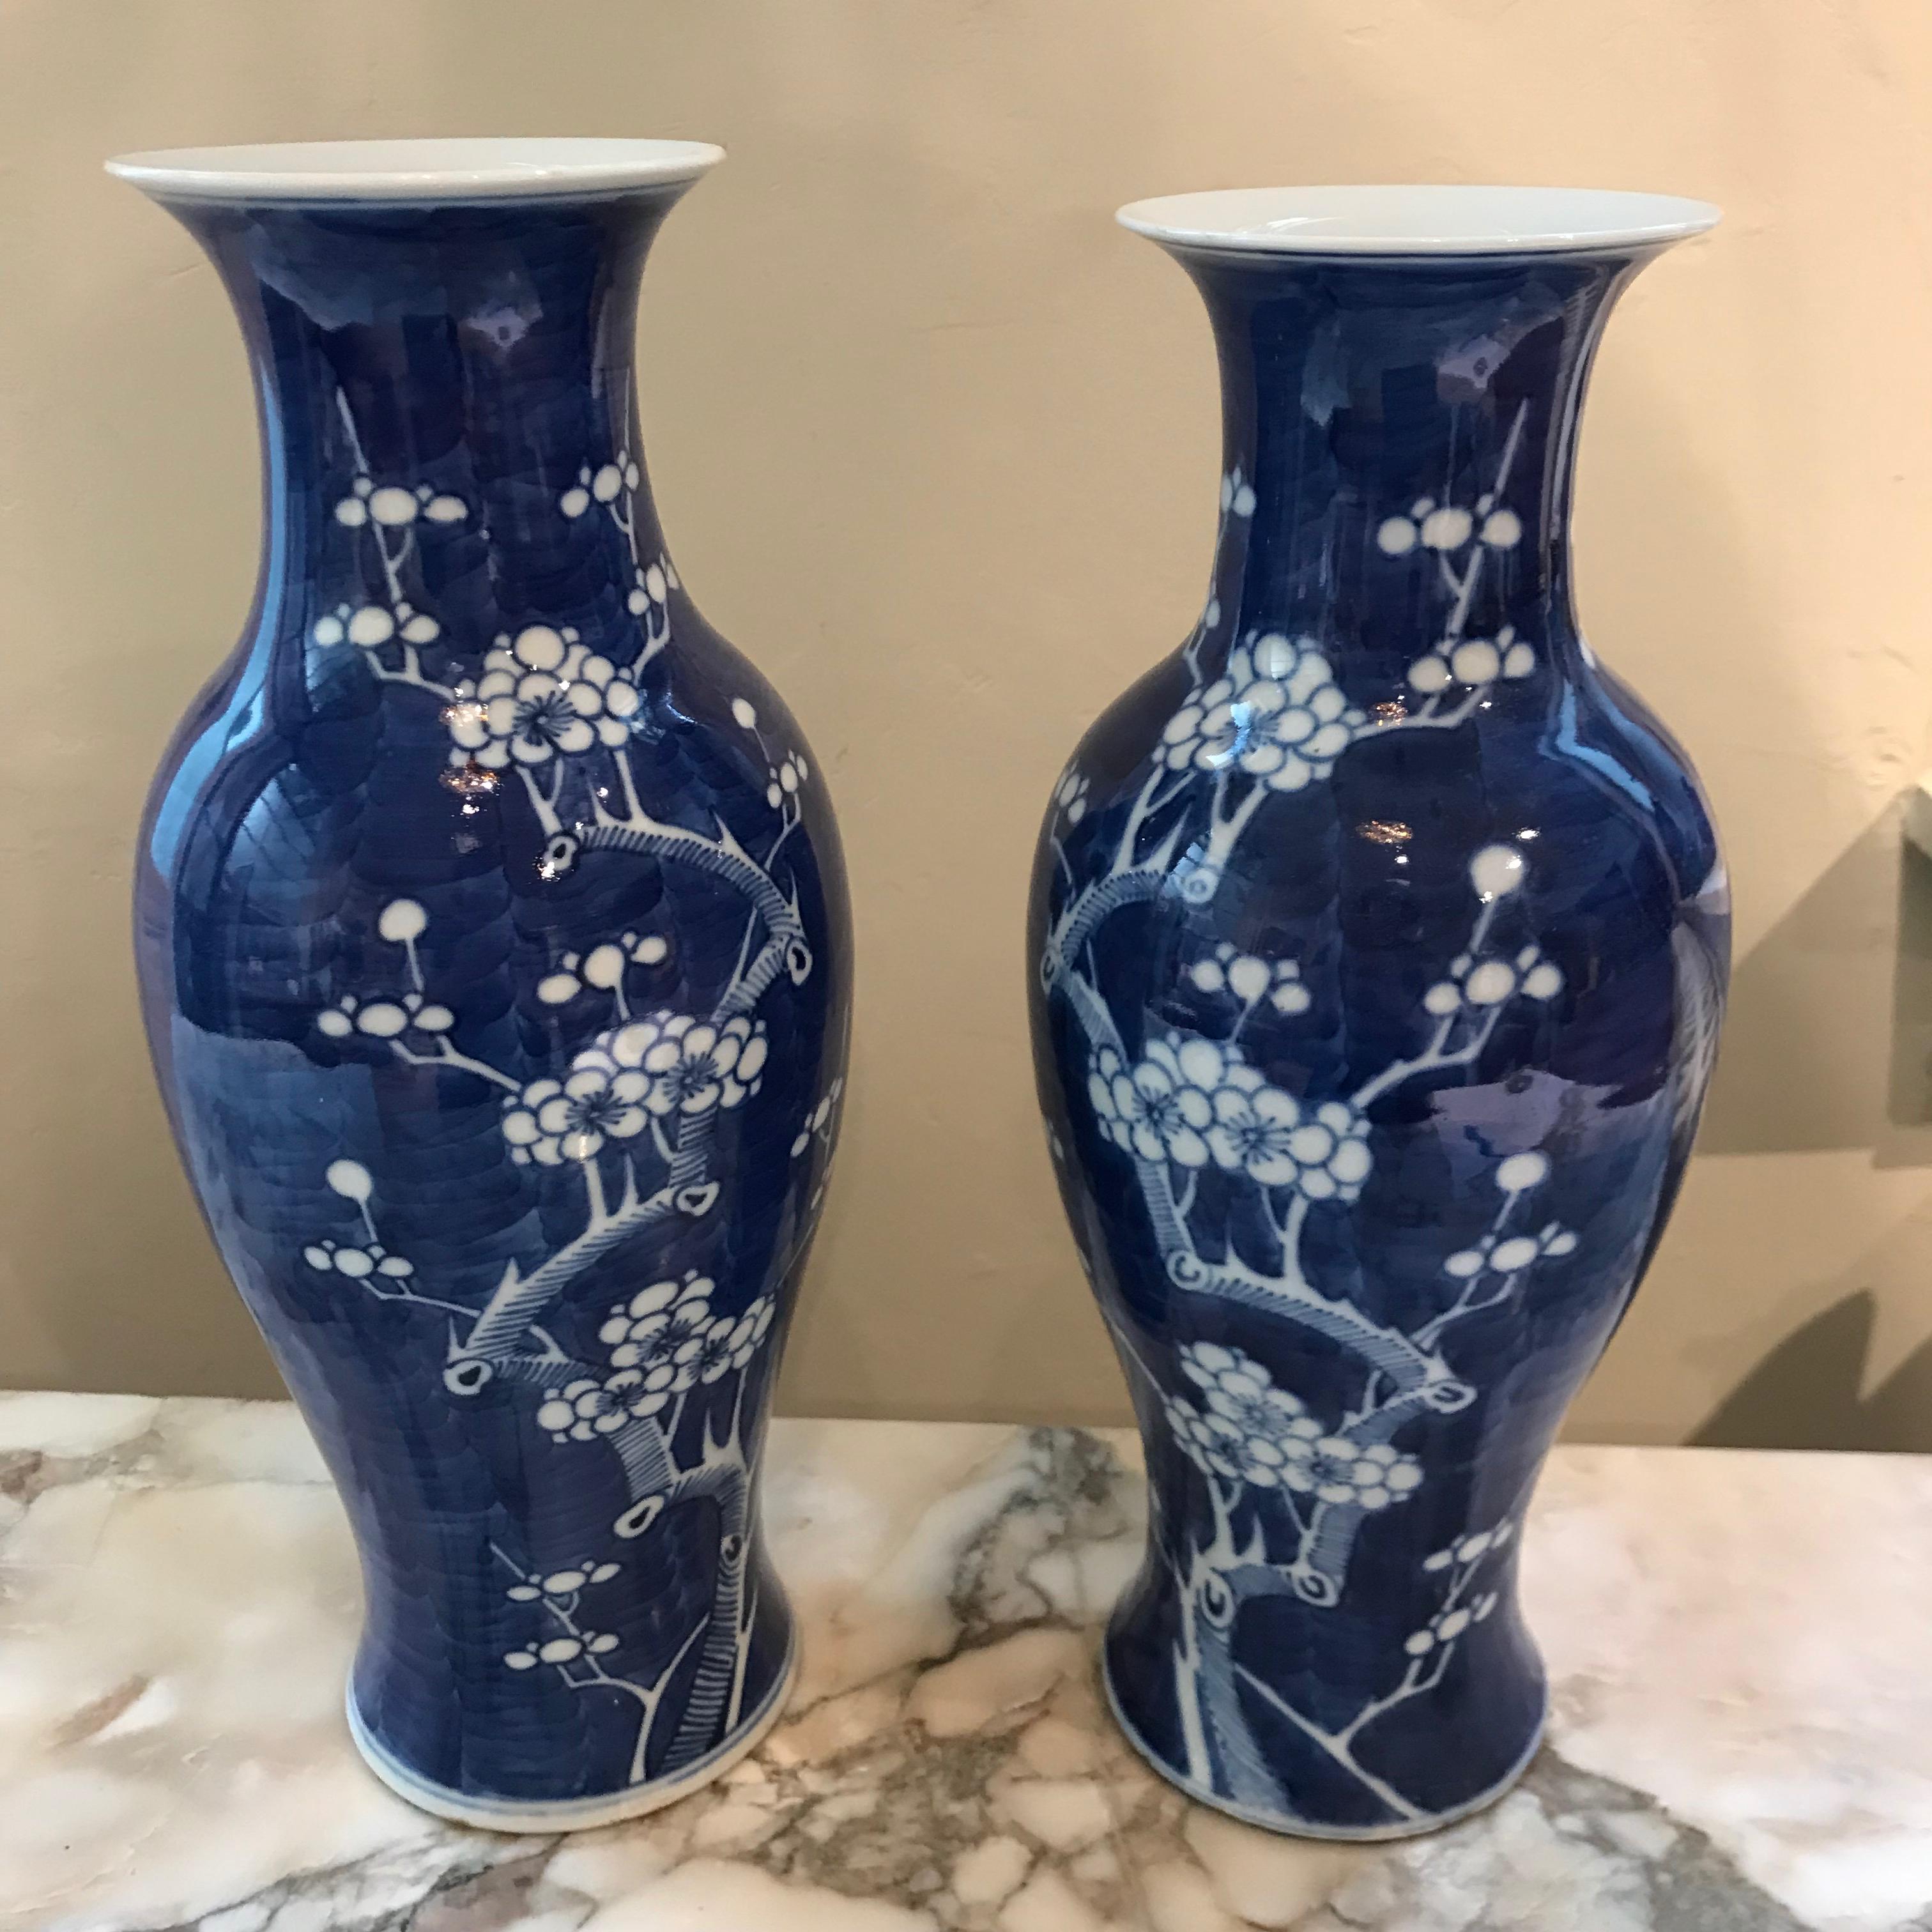 Cobalt blue Chinese Prunus Hawthorn pattern vases, circa 1910-1920. Both in very good condition. One vase is slightly taller and wider than the other making them not quite a pair, but not noticable when placed apart on a mantle etc.
one=30.50